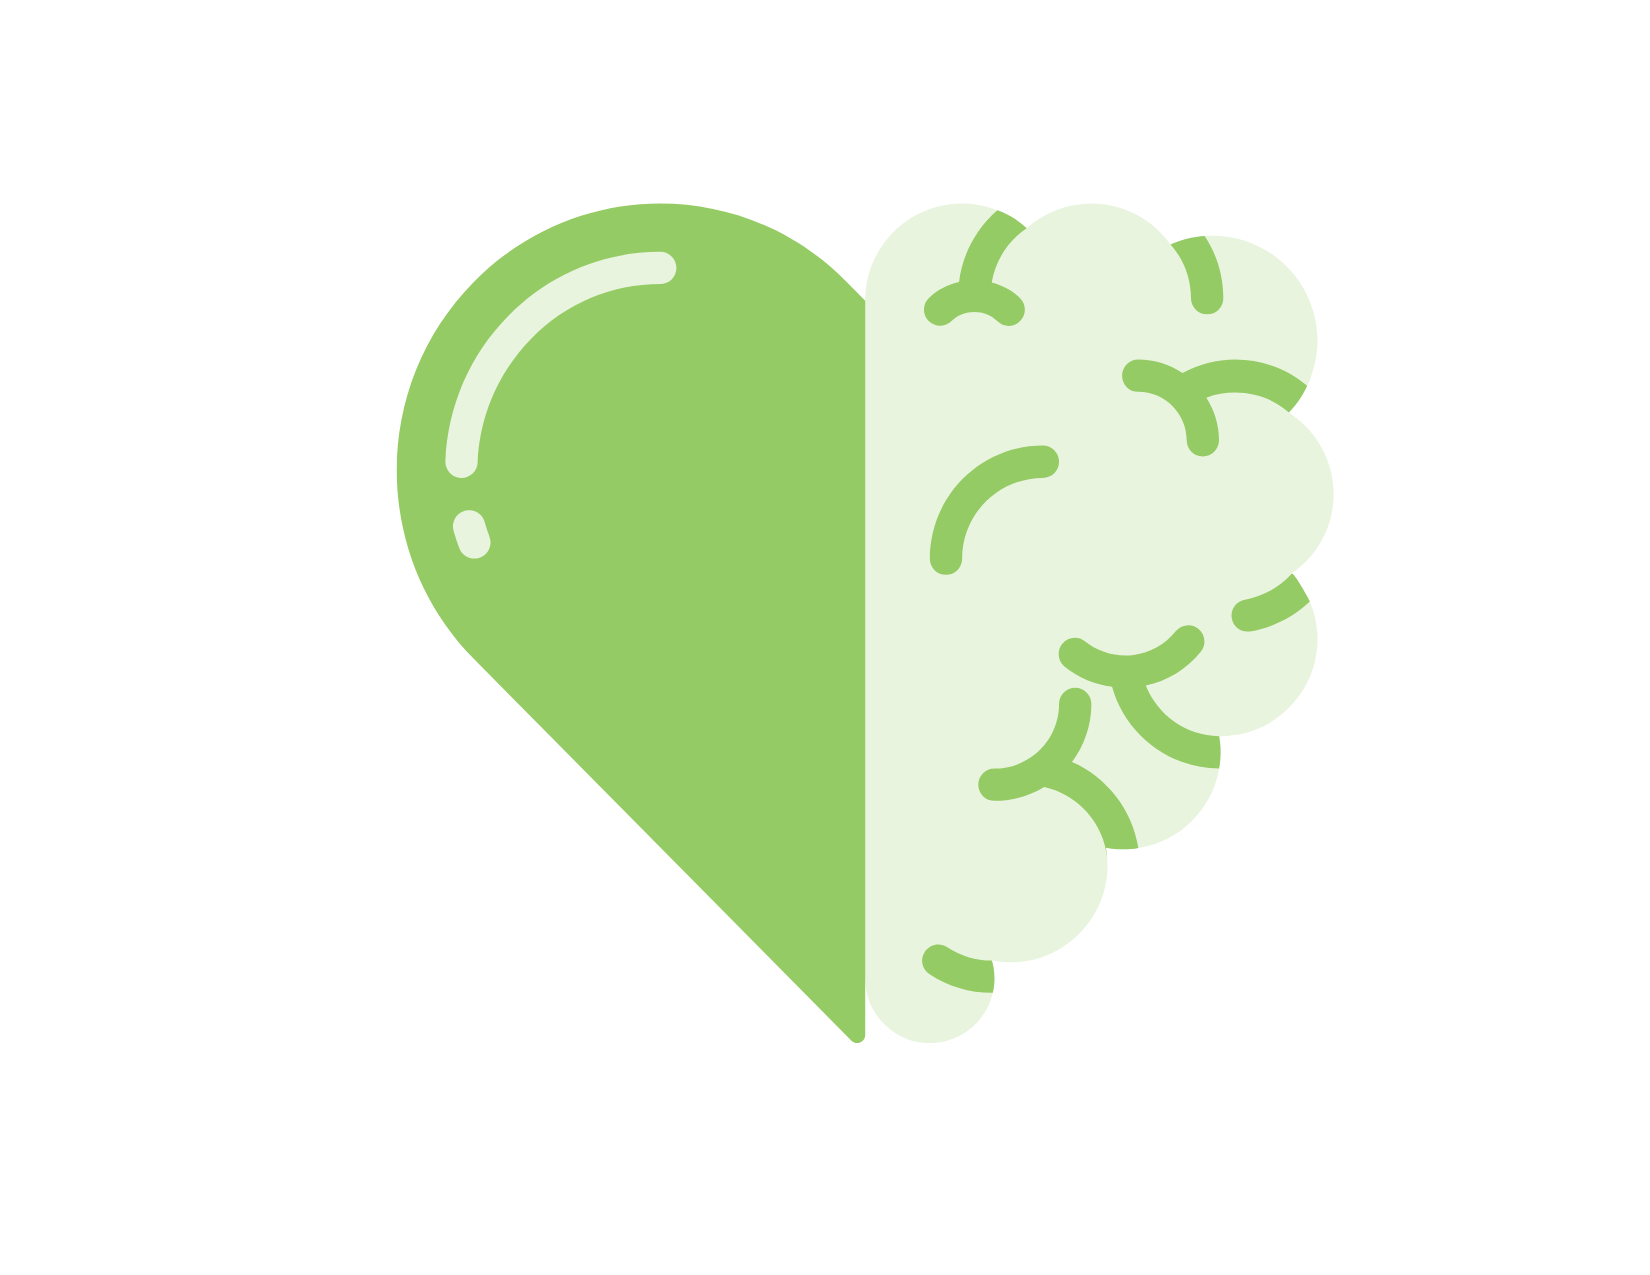 illustrated image of heart with one side looking like a heart, and the side resembling a brain to depict mental wellness